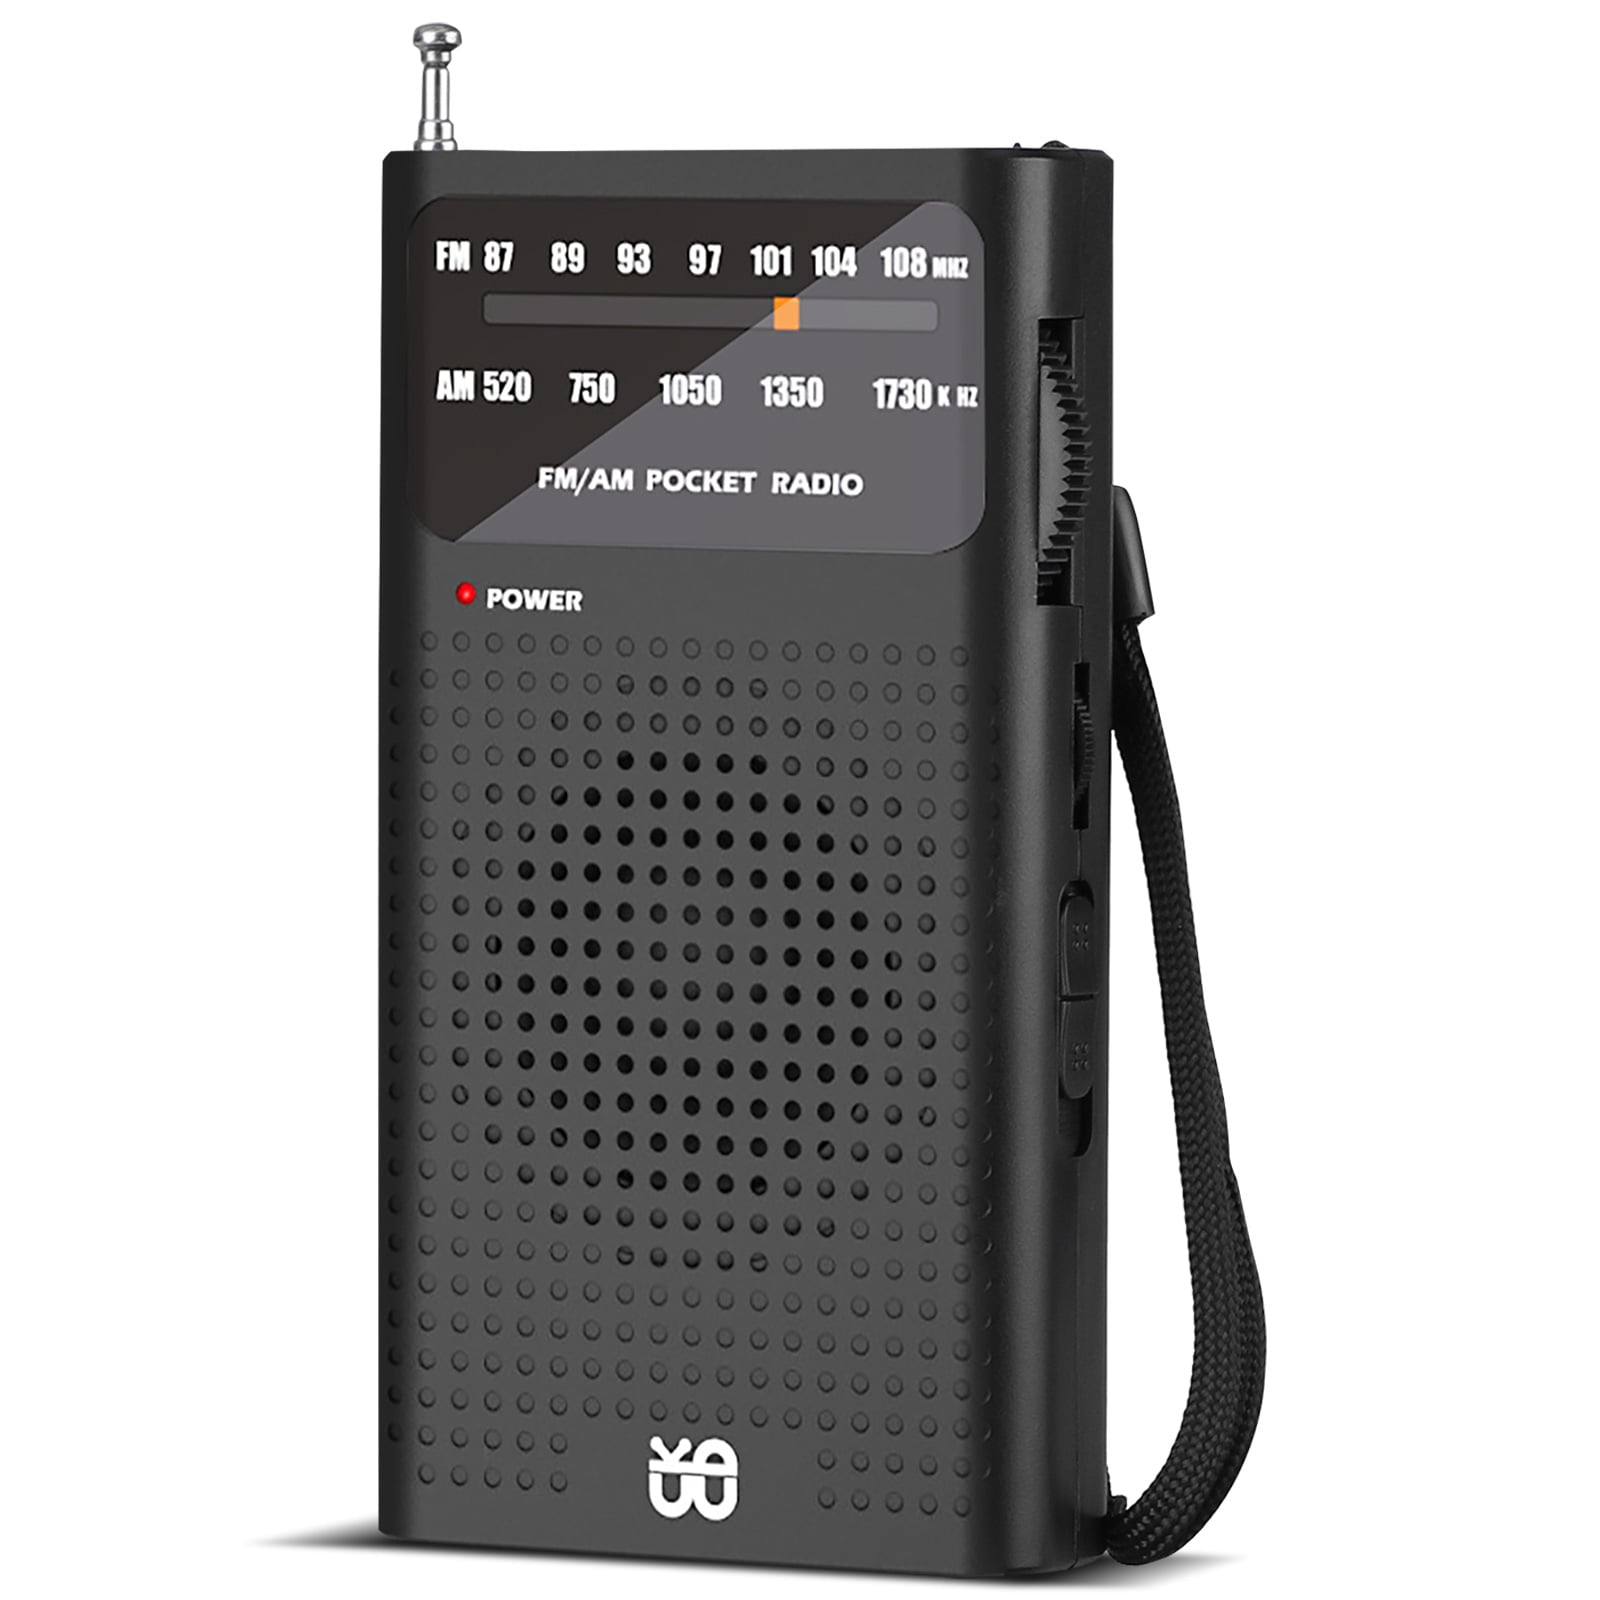 Pocket Radios, Battery Operated AM FM Radio with Loud Speaker, Great